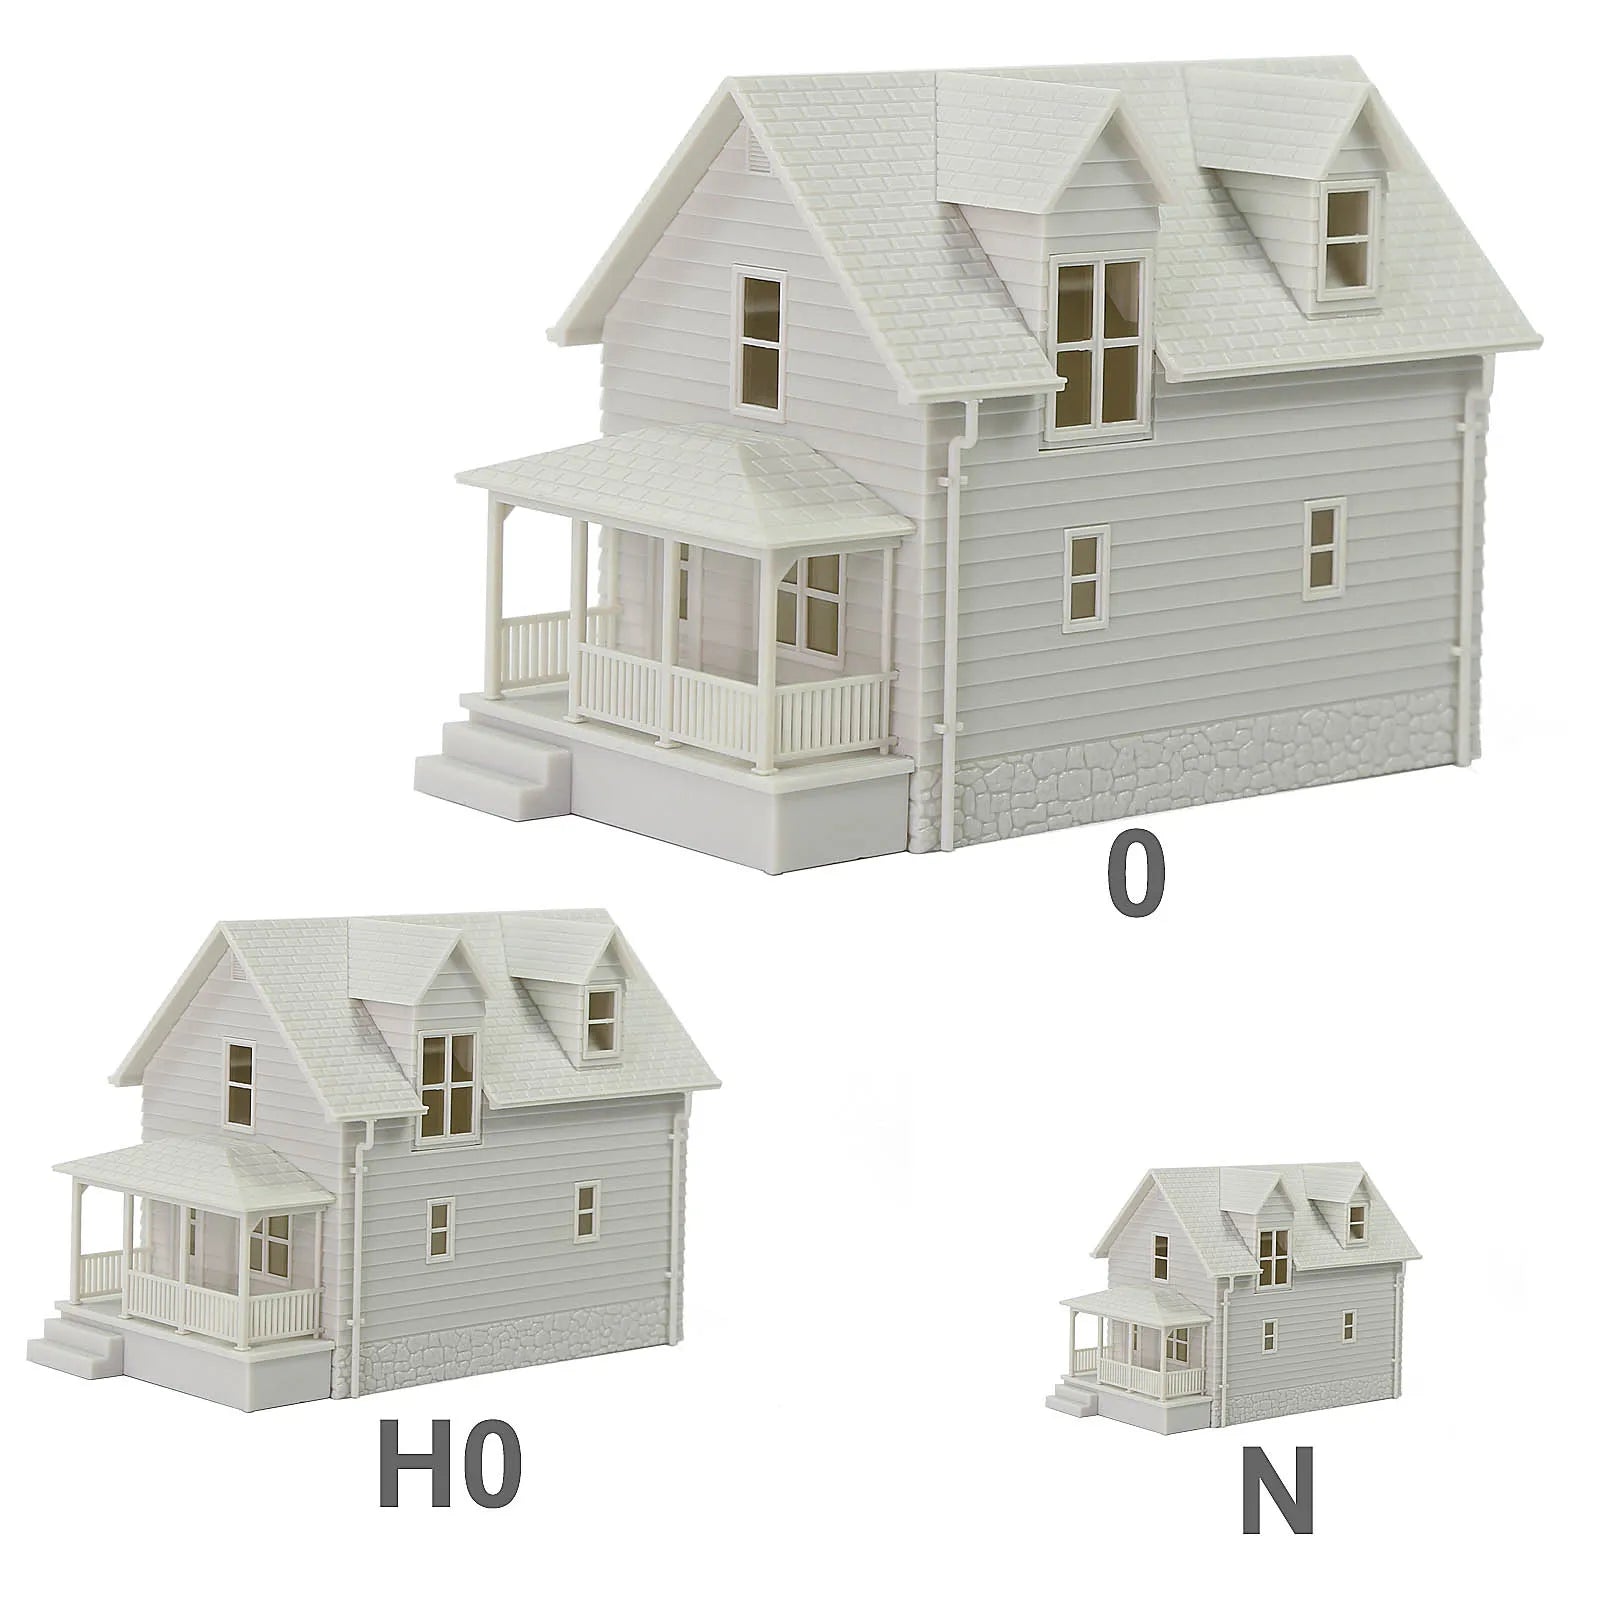 HO Scale Blank White Model Village Houses - Multi-Scale Unassembled Building Kits